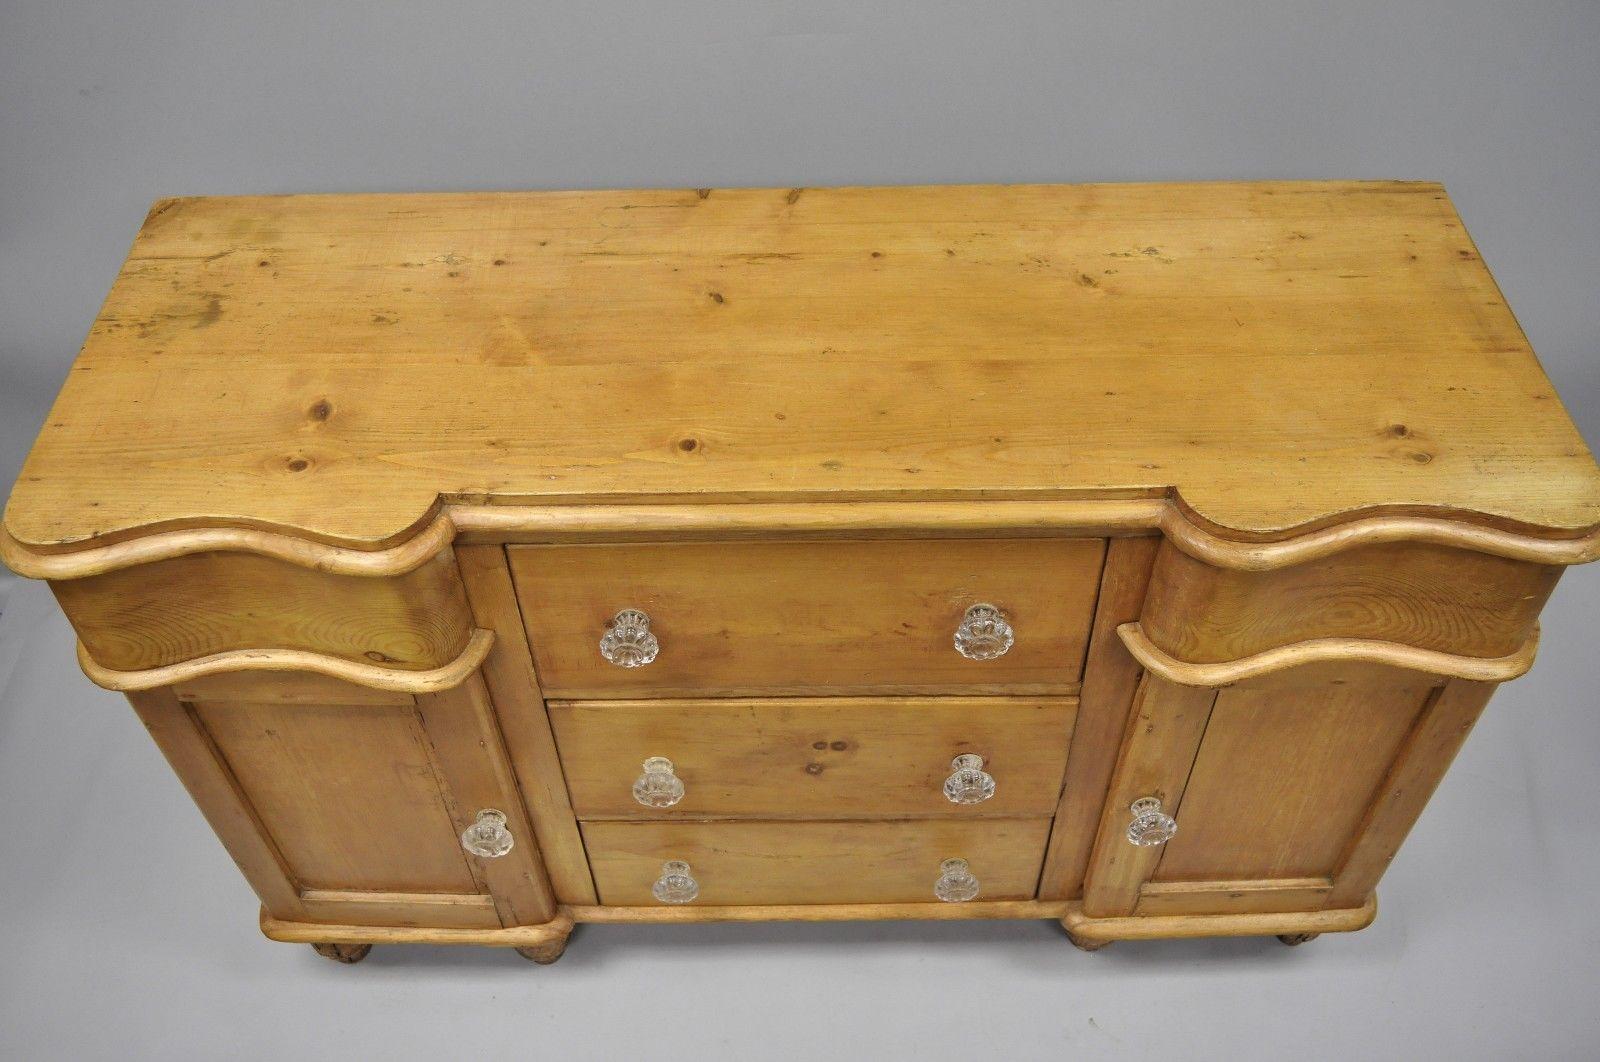 Antique knotty pinewood country primitive sideboard. Item features six turn carved bun feet, glass knobs, serpentine front, solid wood construction, distressed finish, two swing doors, five dovetailed drawers, and quality craftsmanship, circa 19th